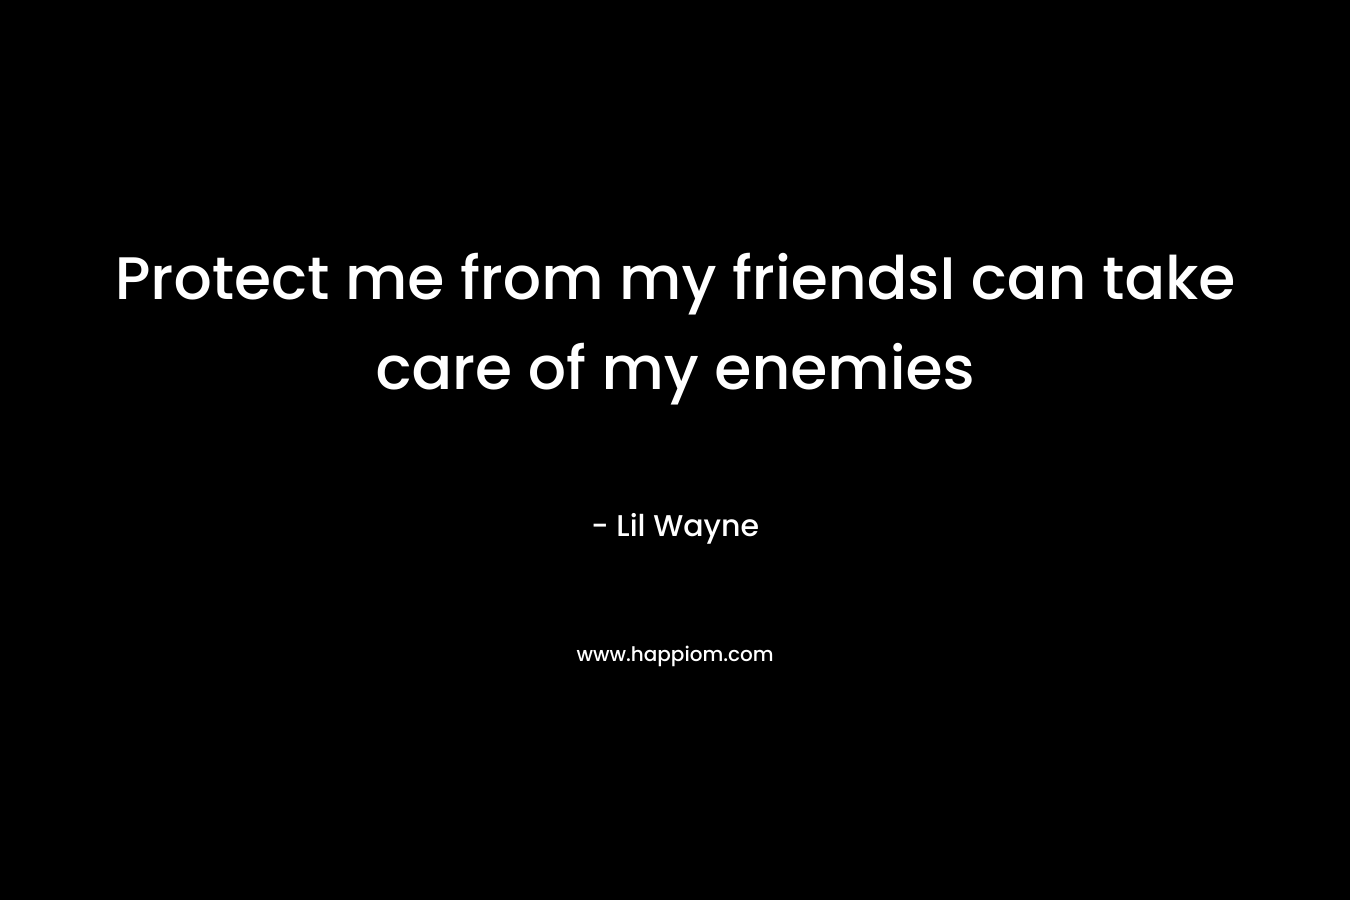 Protect me from my friendsI can take care of my enemies